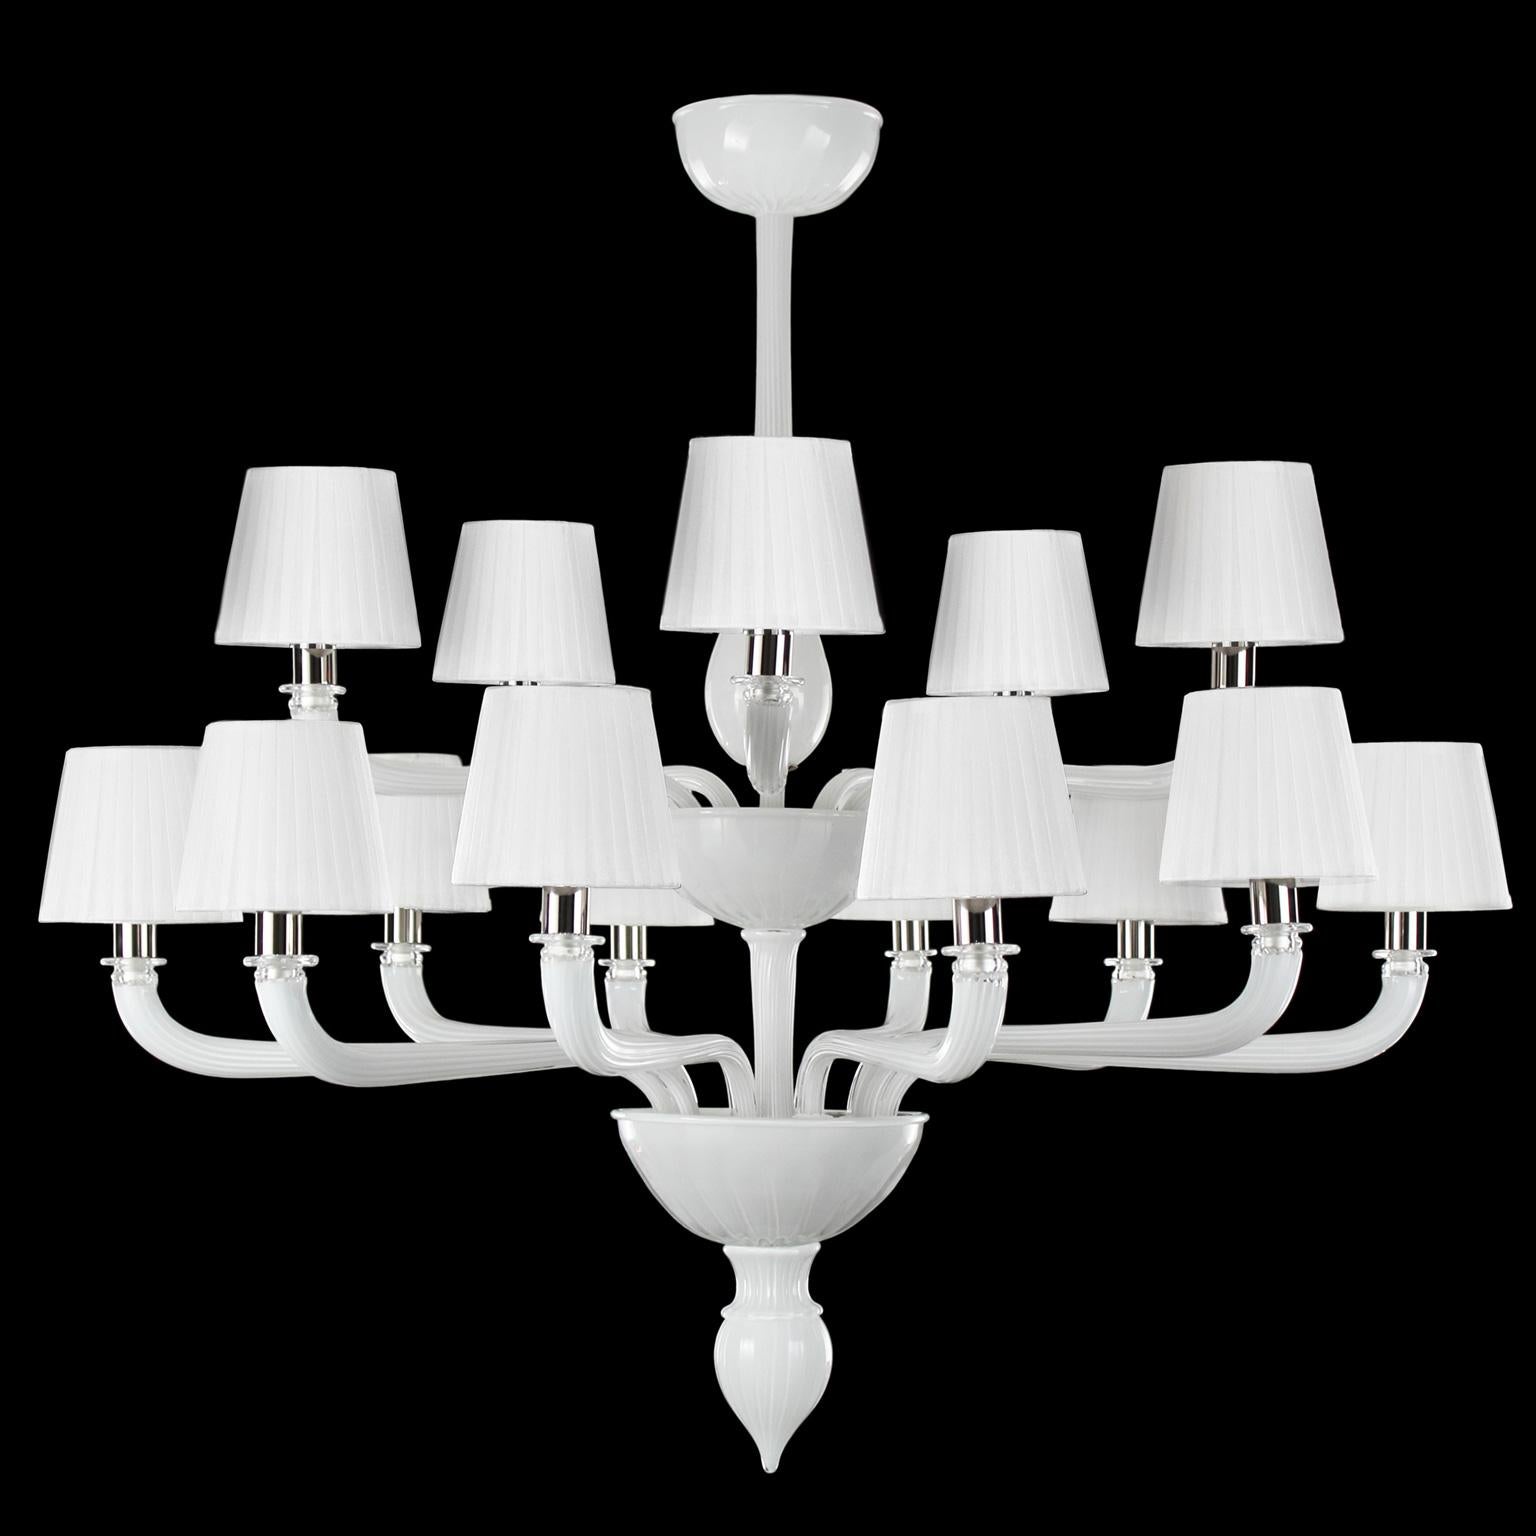 Coco chandelier 10+5 light artistic white encased Murano glass, white handmade lampshades by Multiforme
The glass chandeliers Coco collection takes inspiration from Coco Chanel, the revolutionary woman that has changed the fashion industry during